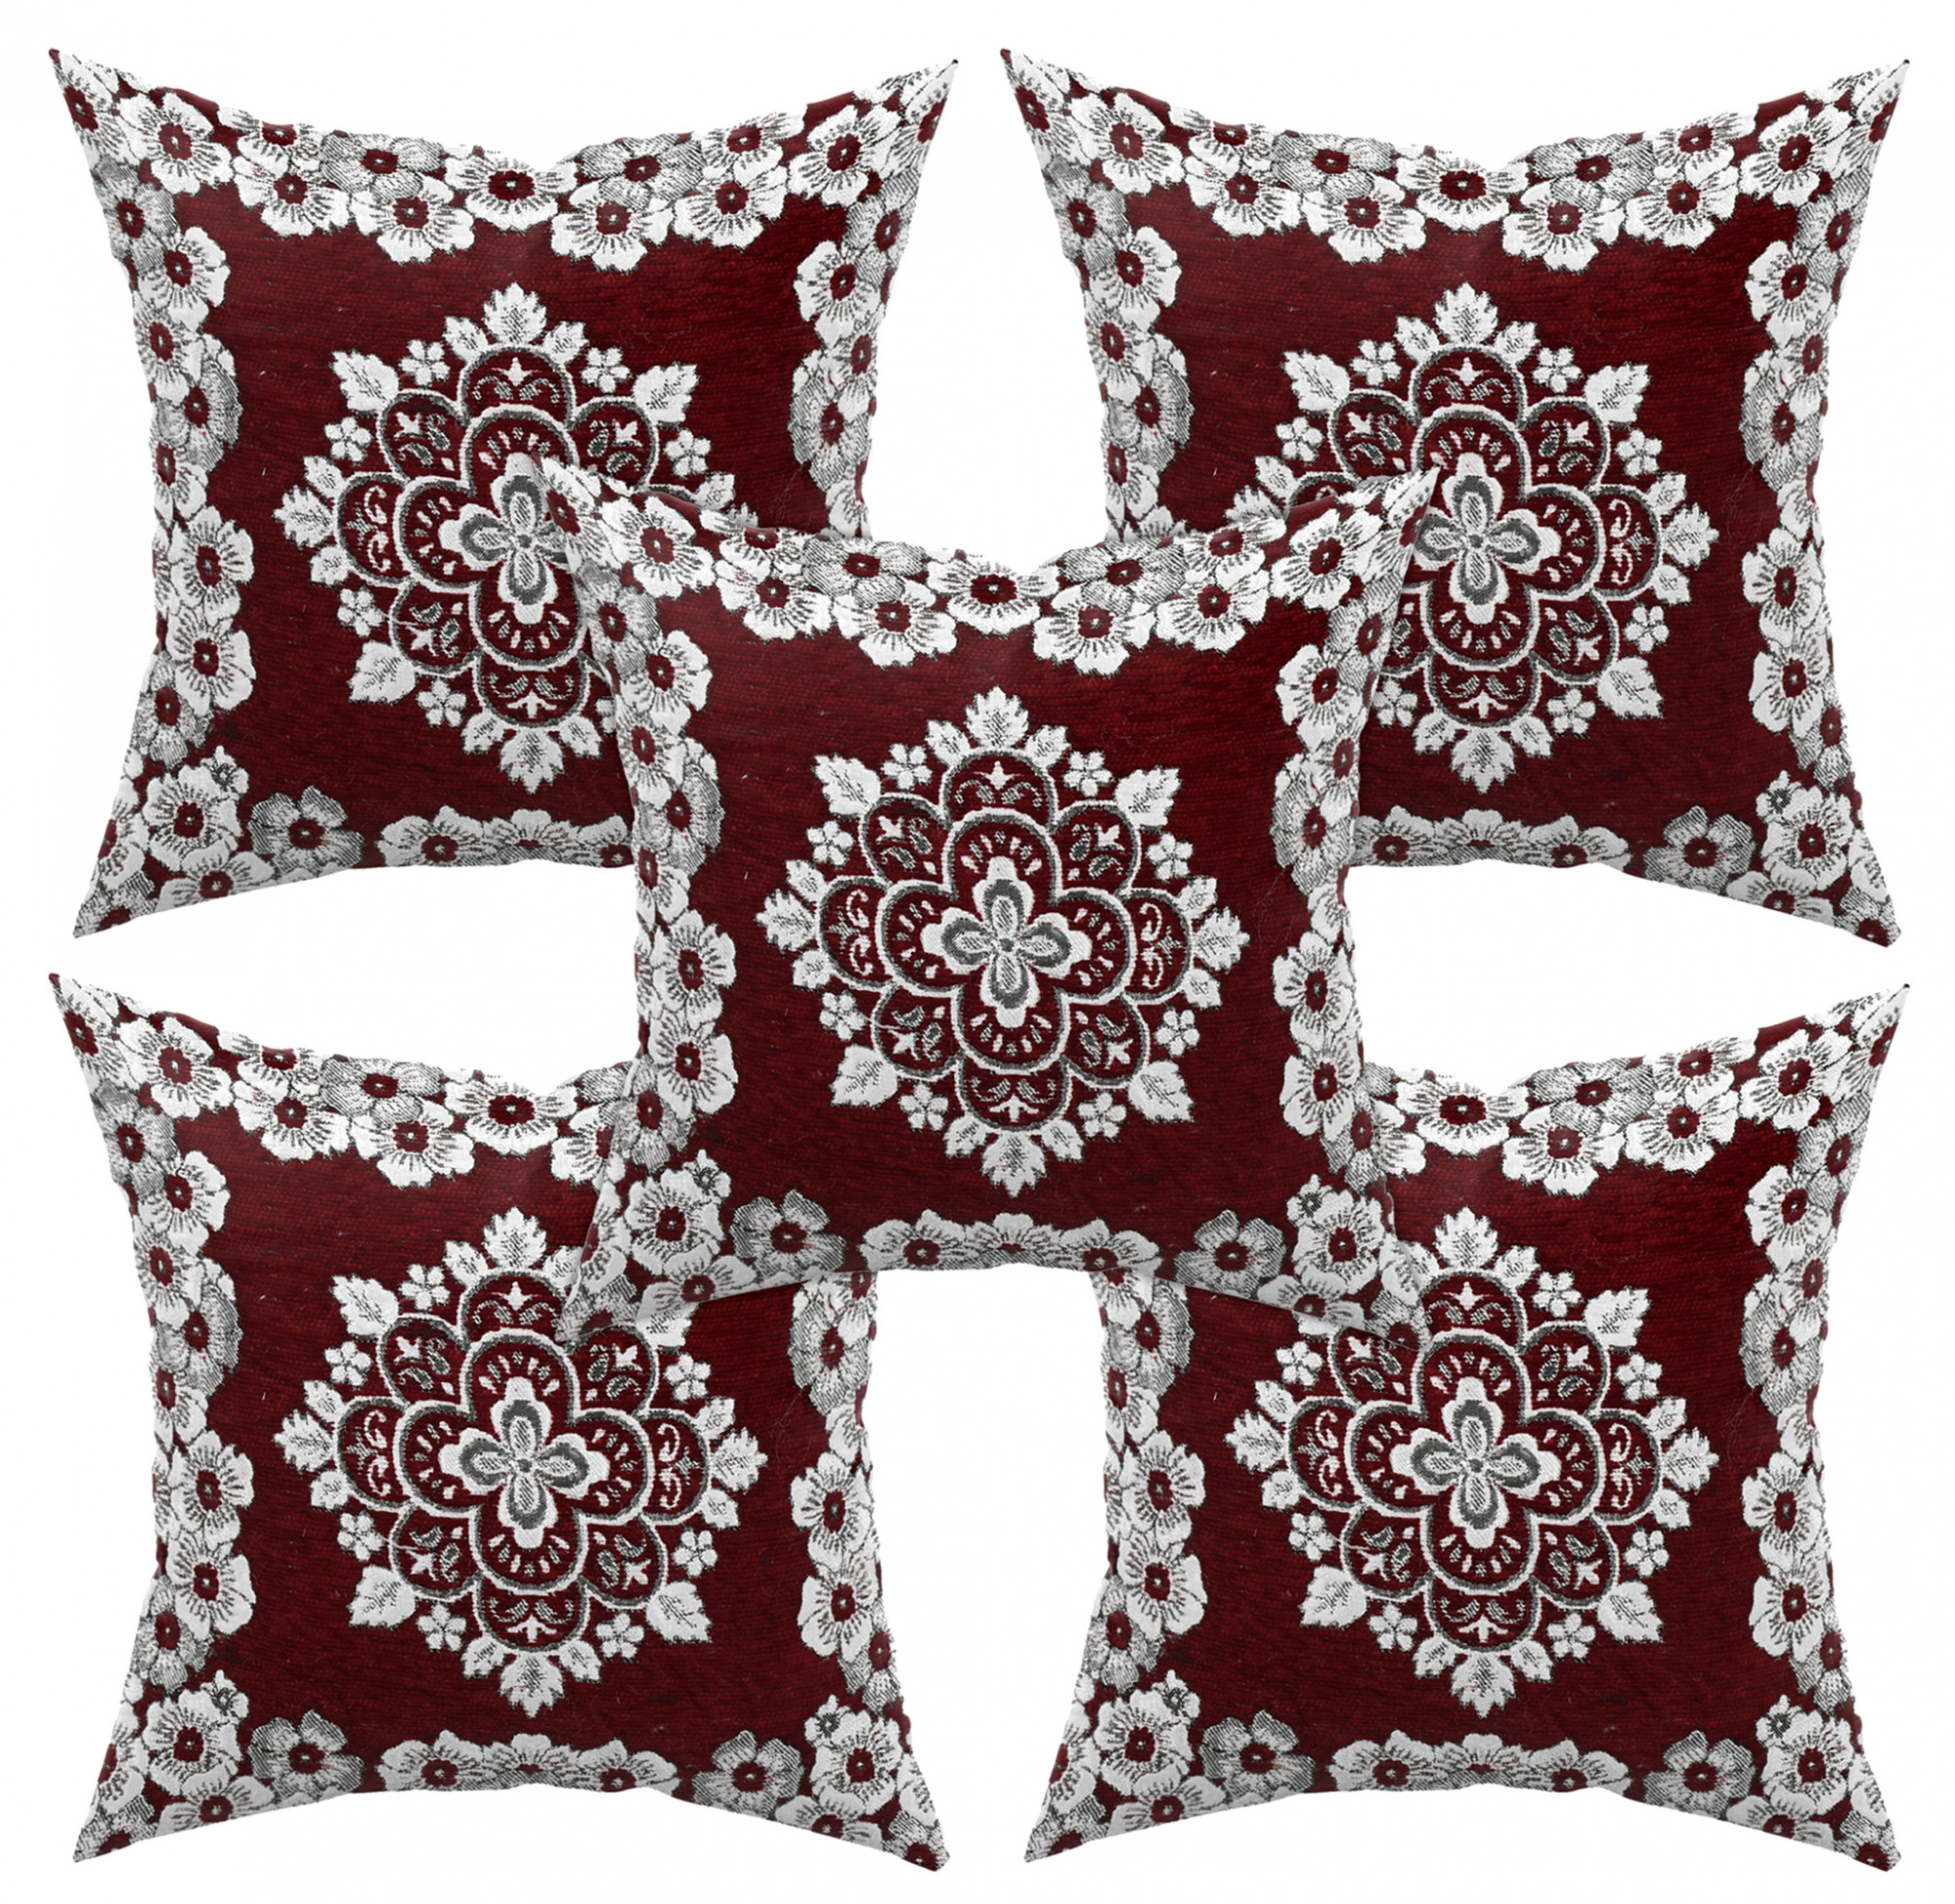 Kuber Industries Velvet Flower Design Soft Decorative Square Throw Pillow Cover, Cushion Covers, Pillow Case For Sofa Couch Bed Chair 16x16 Inch-(Maroon)